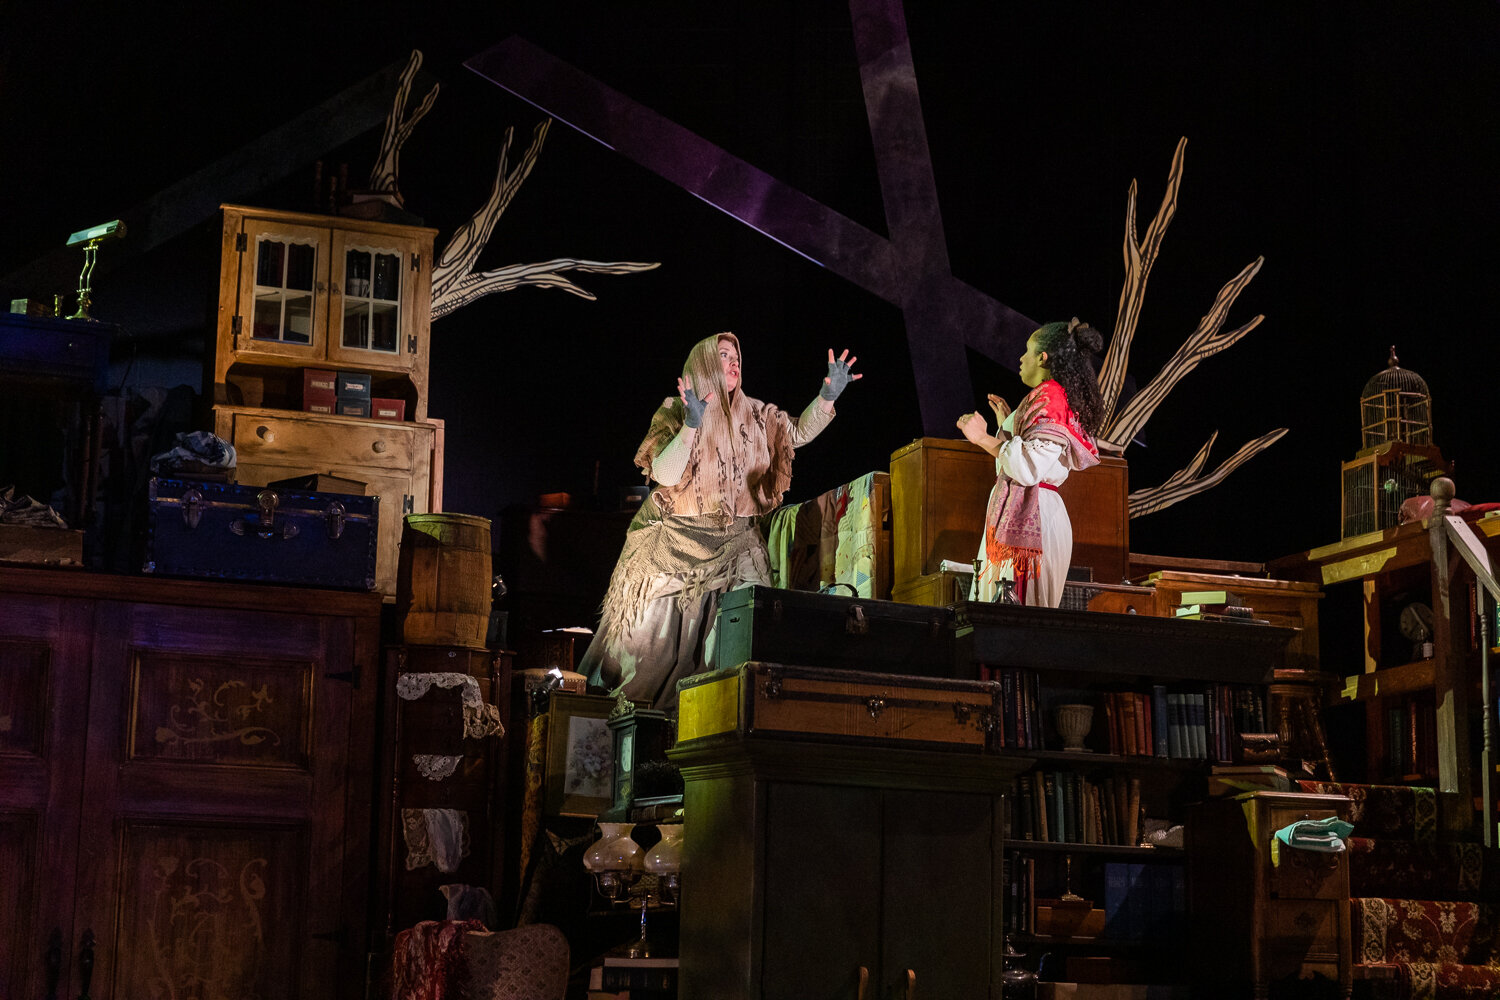  In the Operatic Tragedy, Clarissa meets a Hag in the Forest 